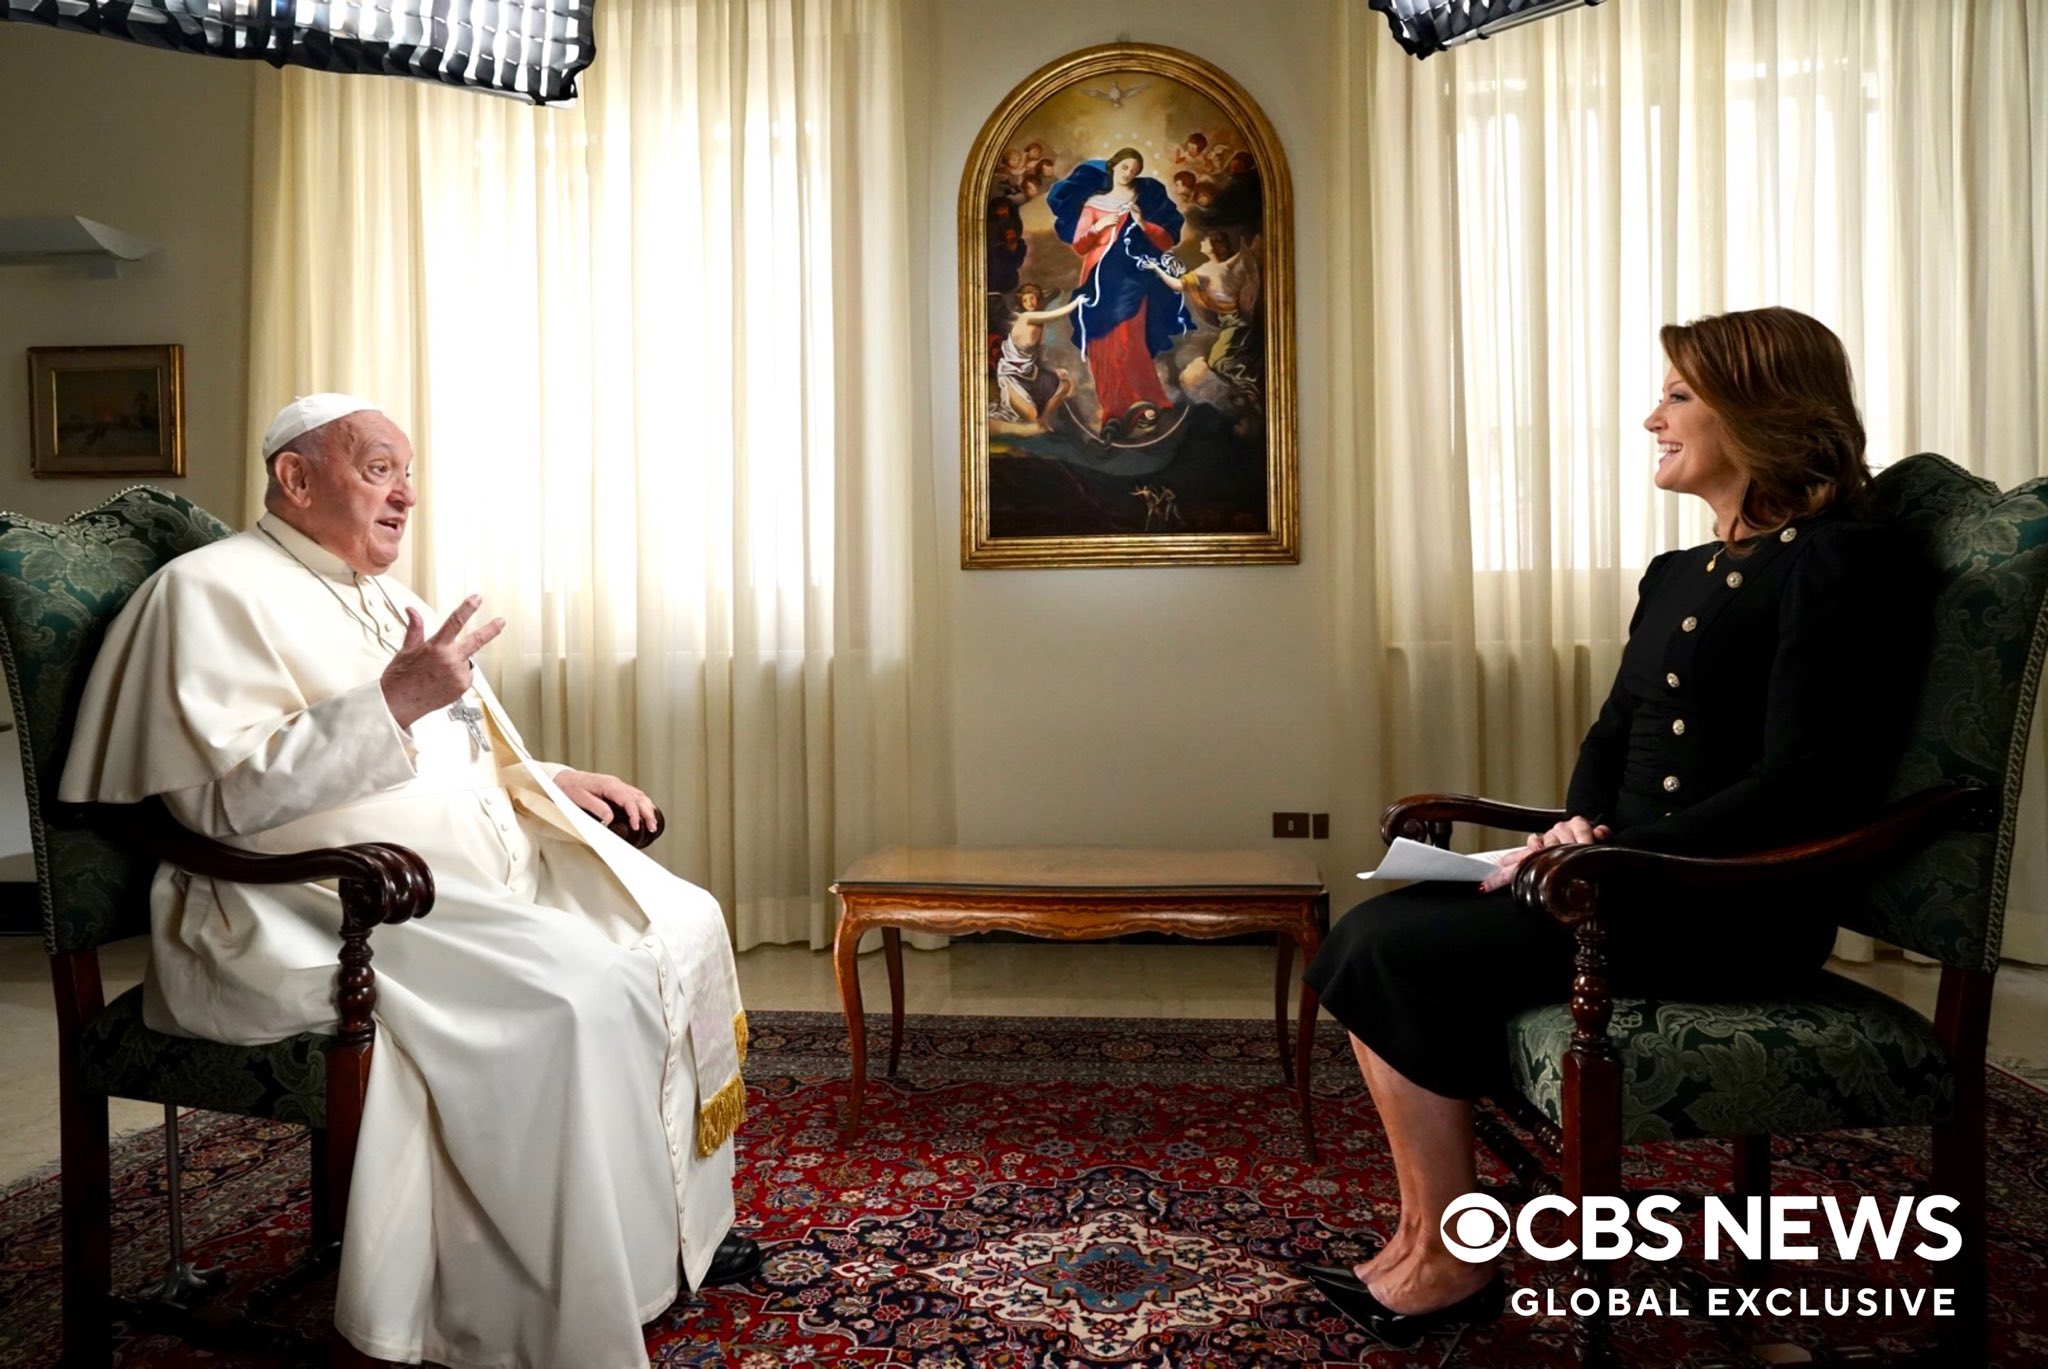 Norah O'Donnell's Historic Interview with Pope Francis Airs Sunday, May 19 on "60 Minutes"